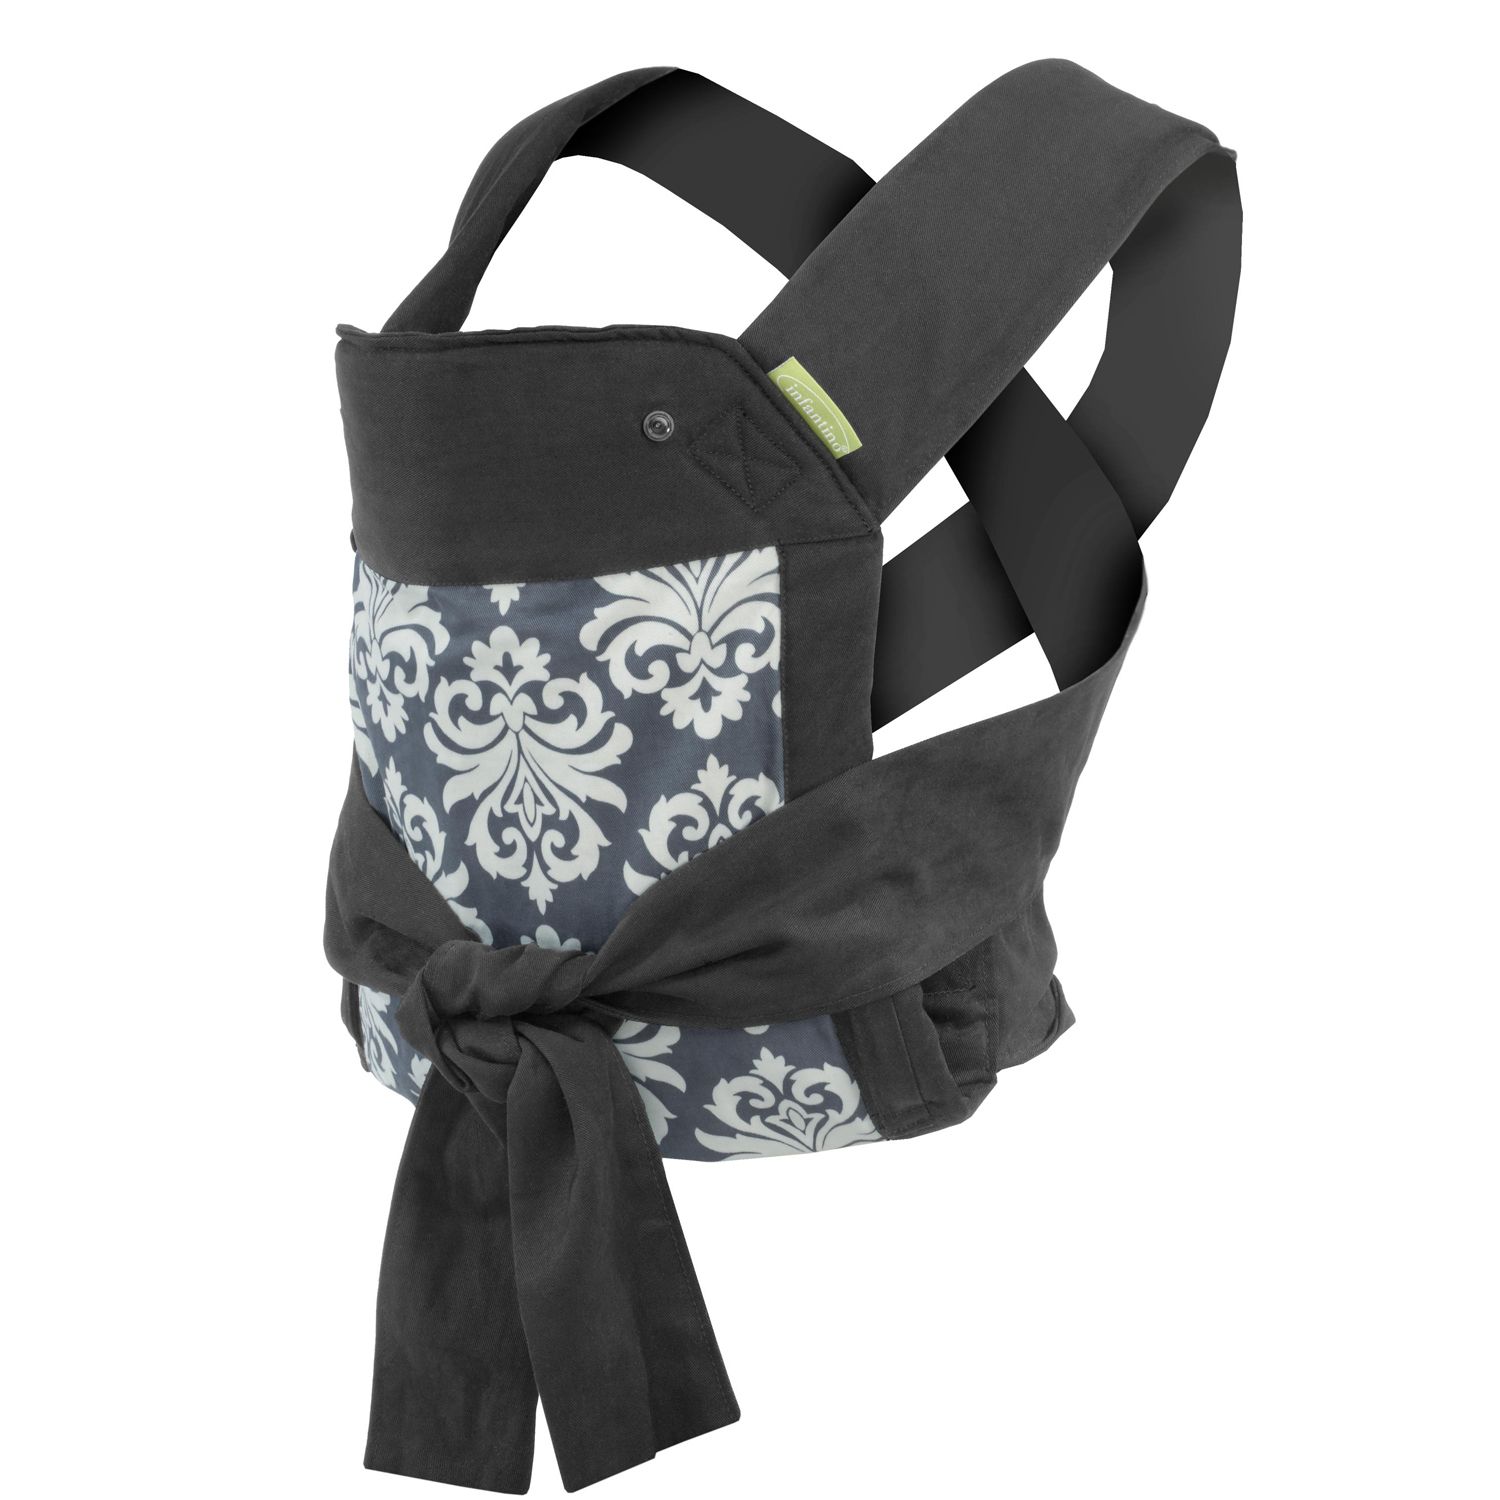 infantino carrier price